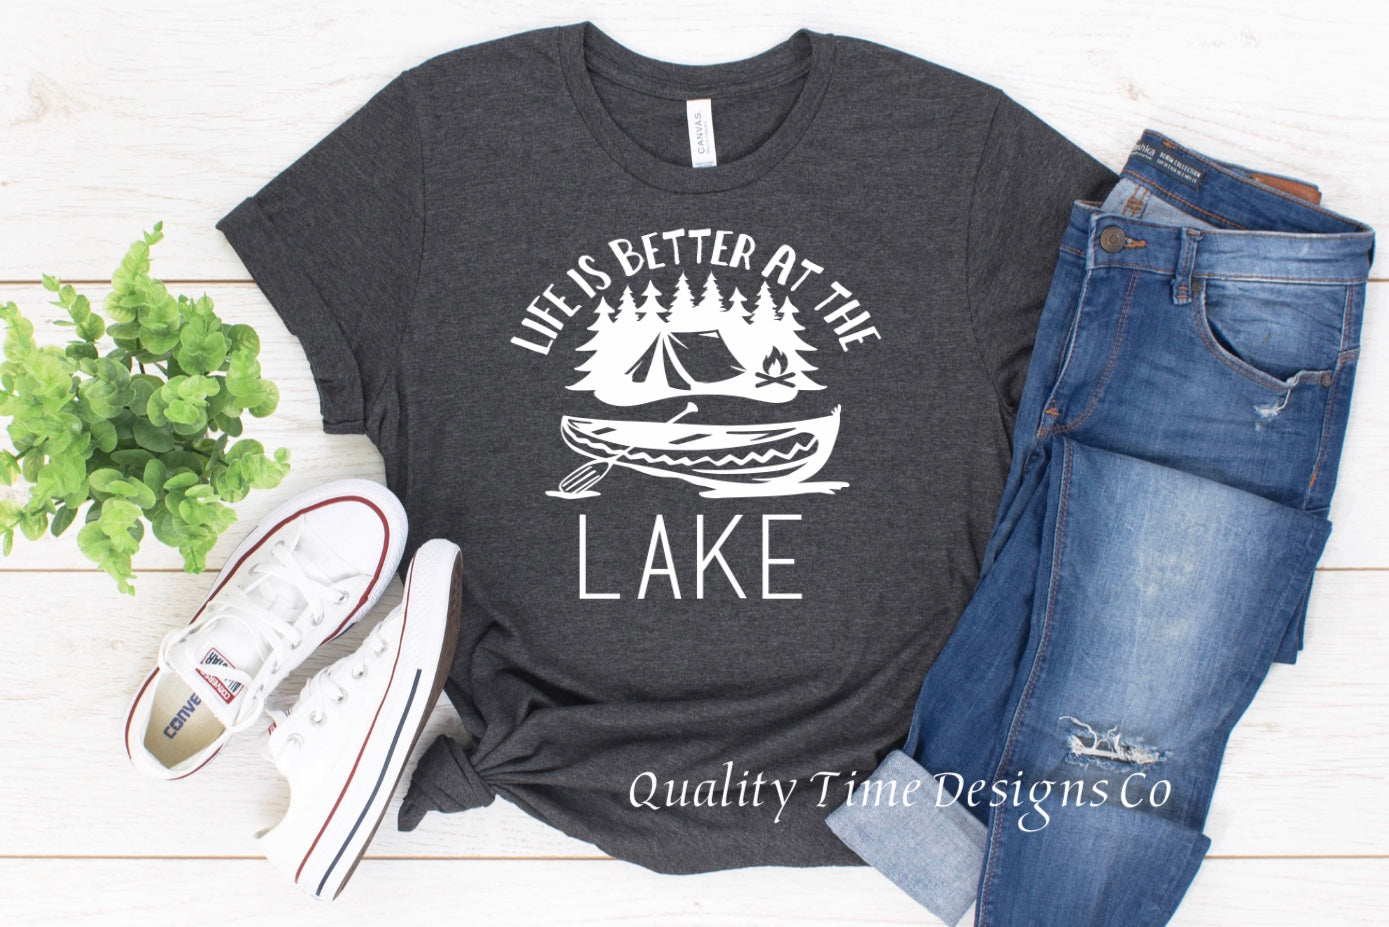 Life is better at the lake t-shirt 